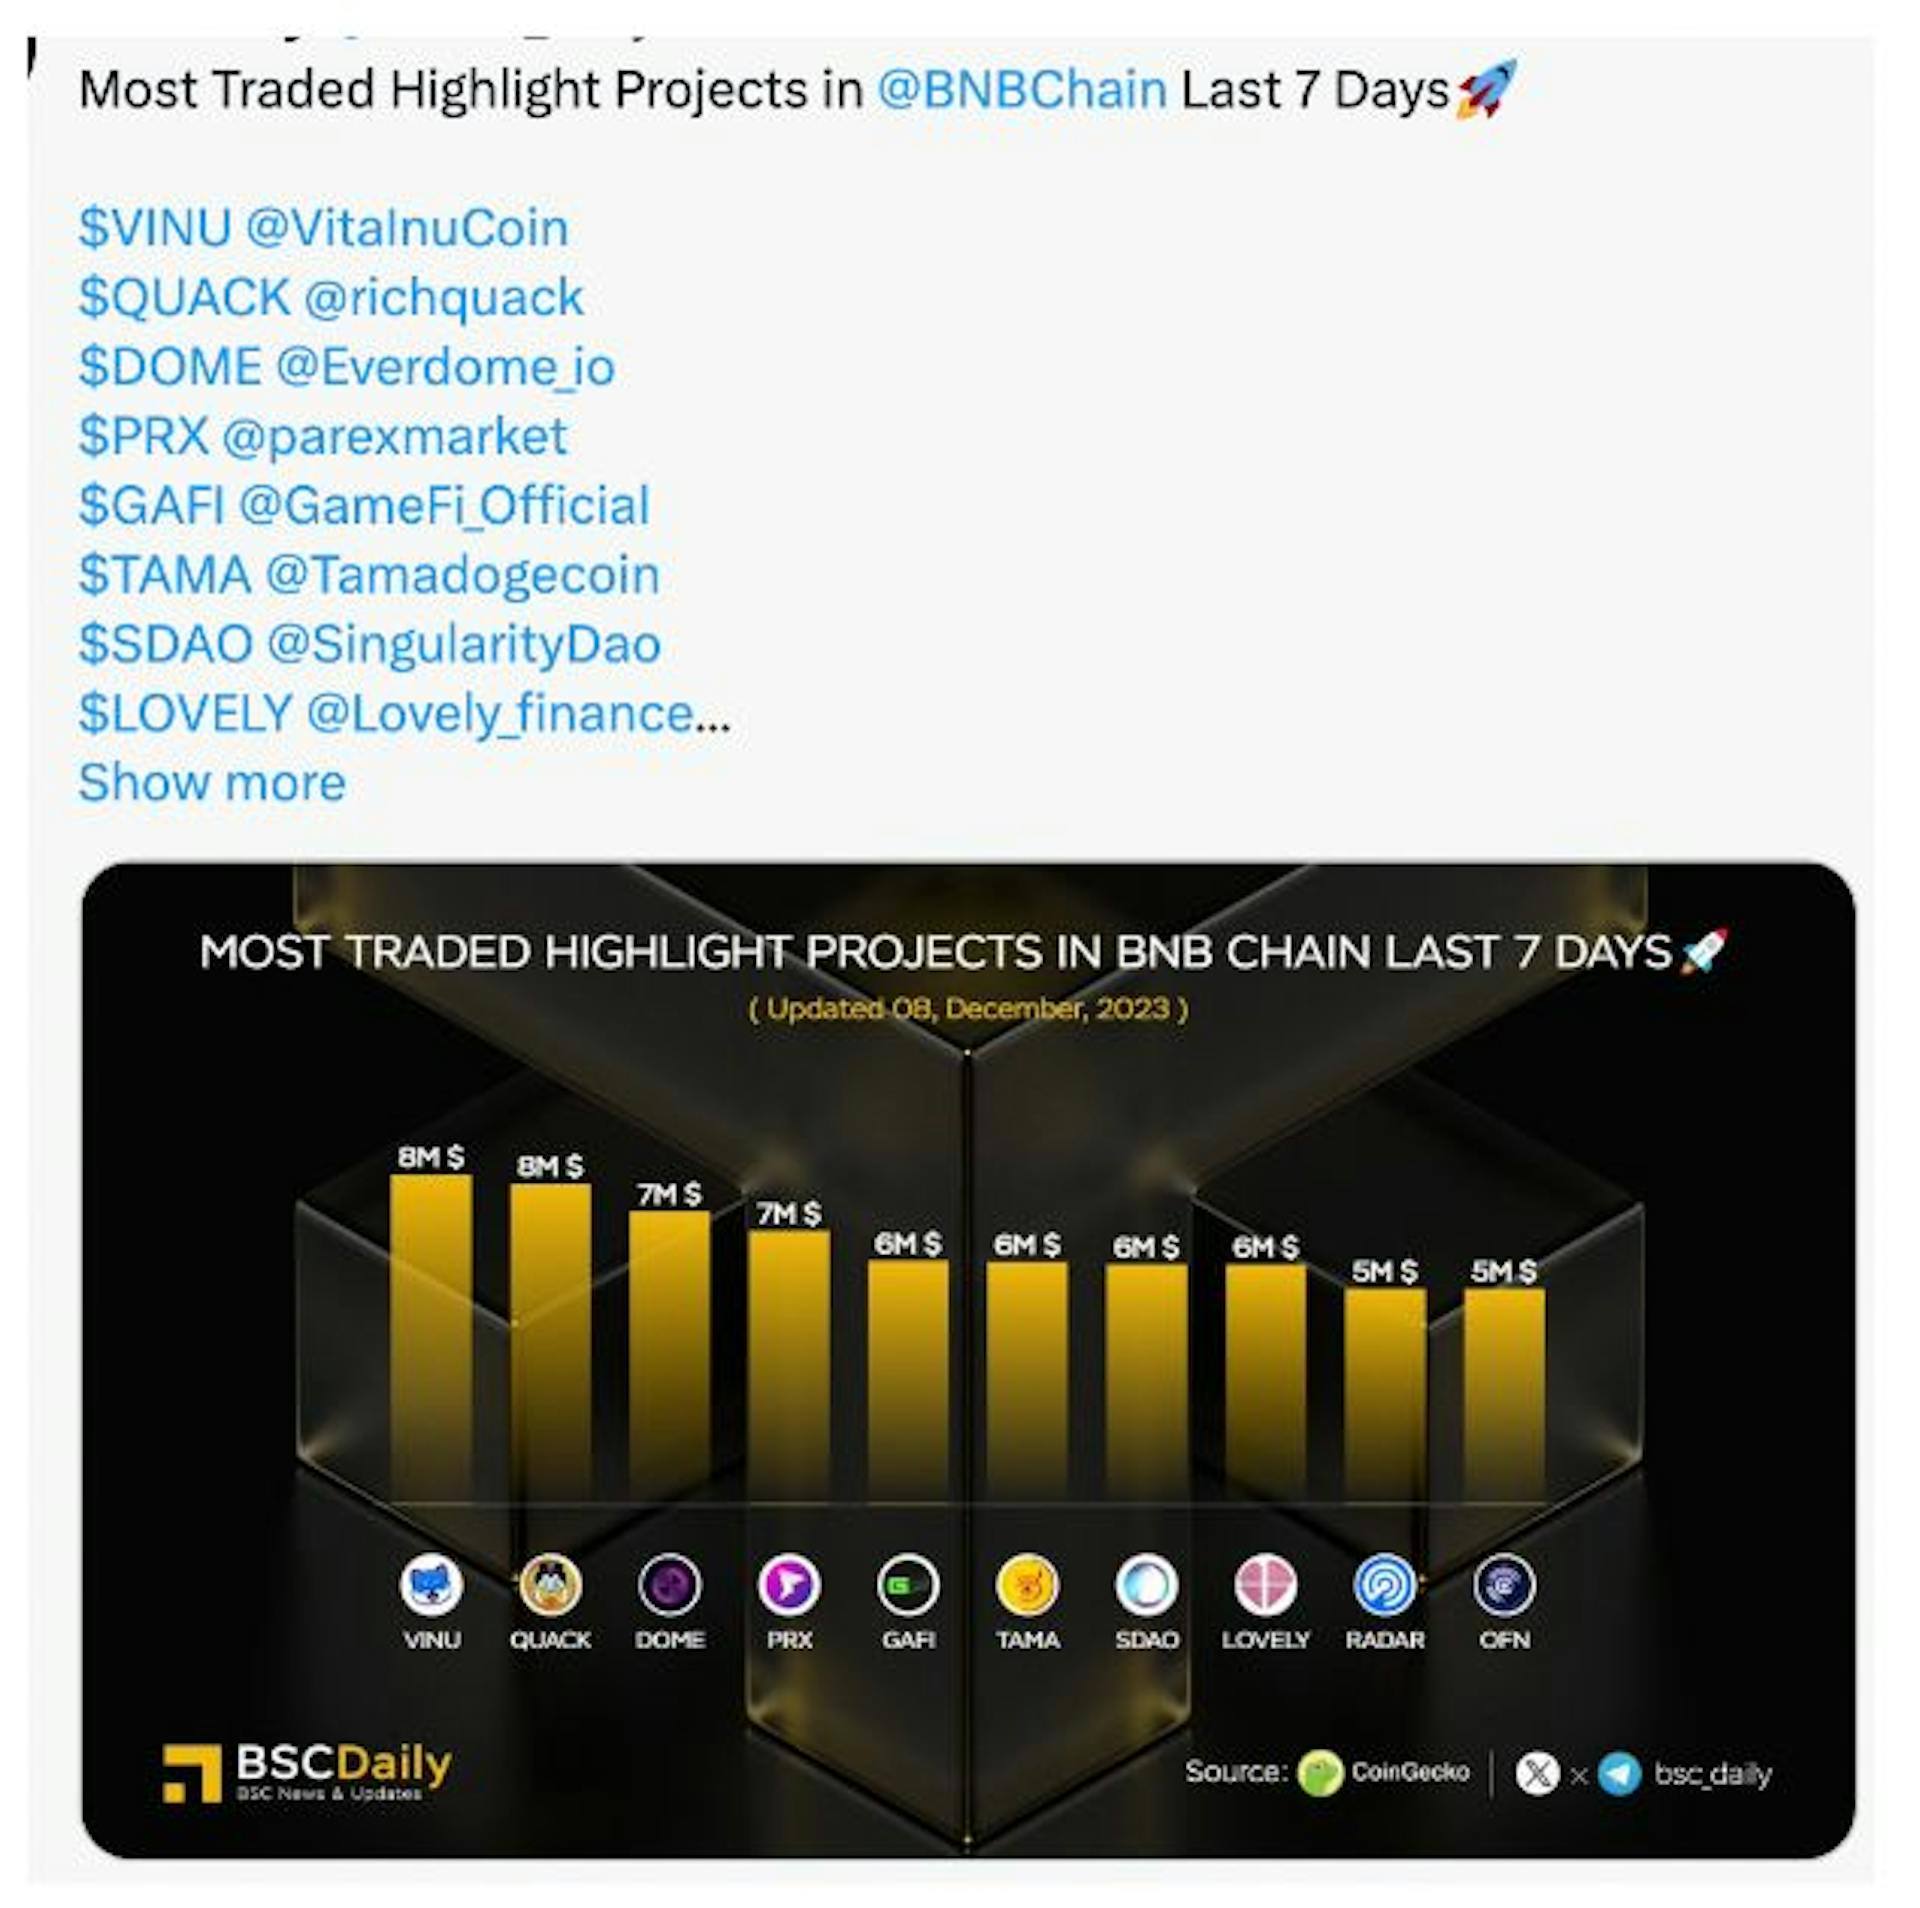 Most Traded Highlight Projects